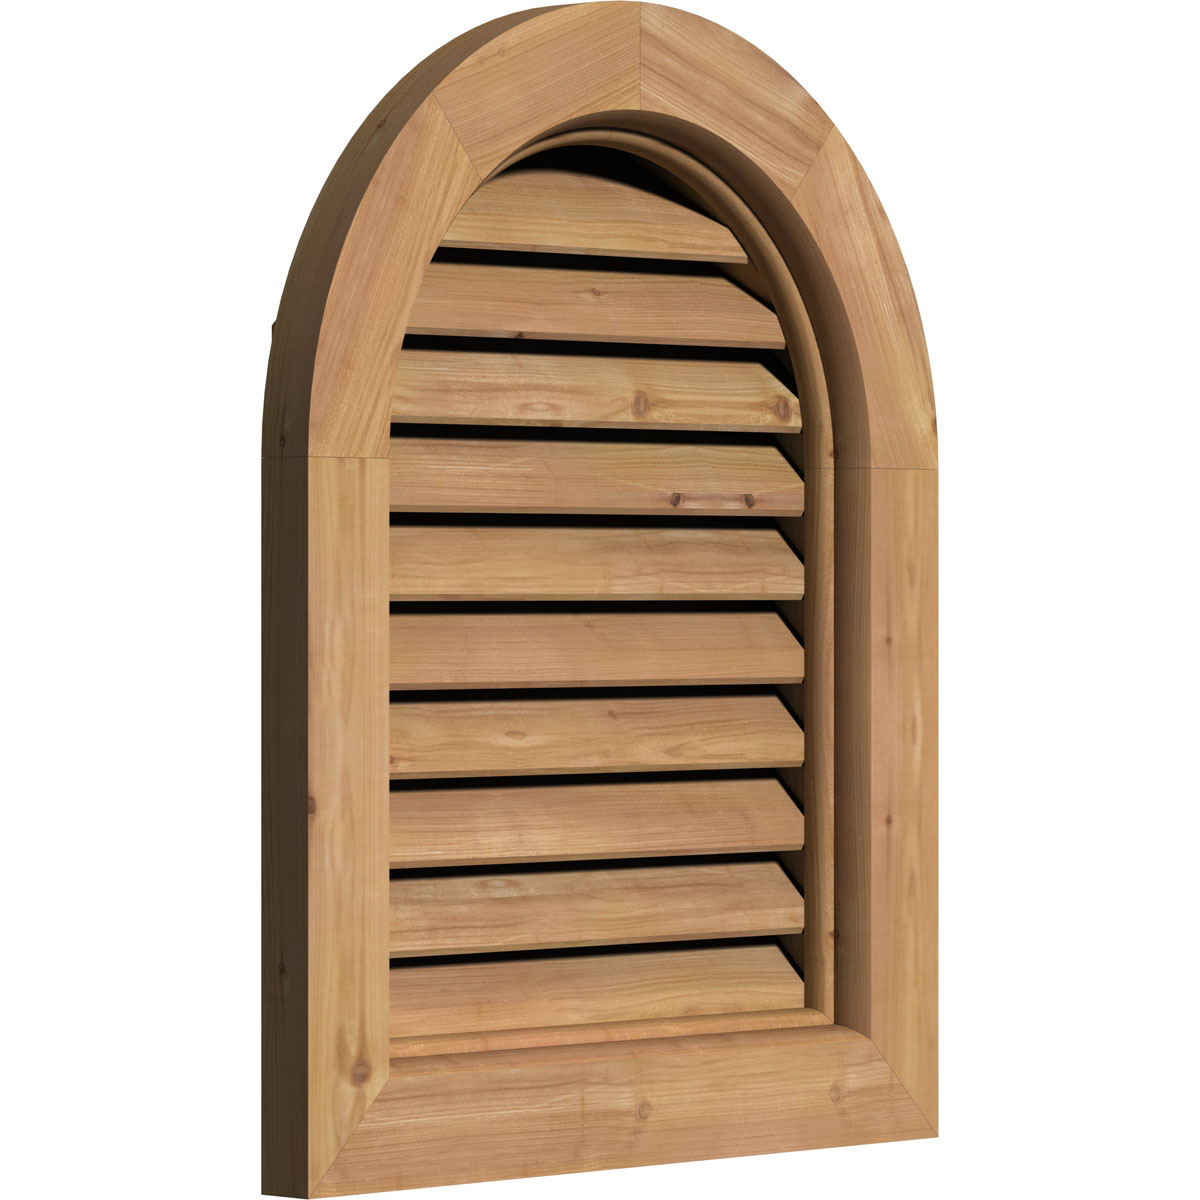 12"W x 32"H Round Top Gable Vent (17"W x 37"H Frame Size): Unfinished, Functional, Smooth Western Red Cedar Gable Vent w/ Brick Mould Face Frame - image 2 of 12